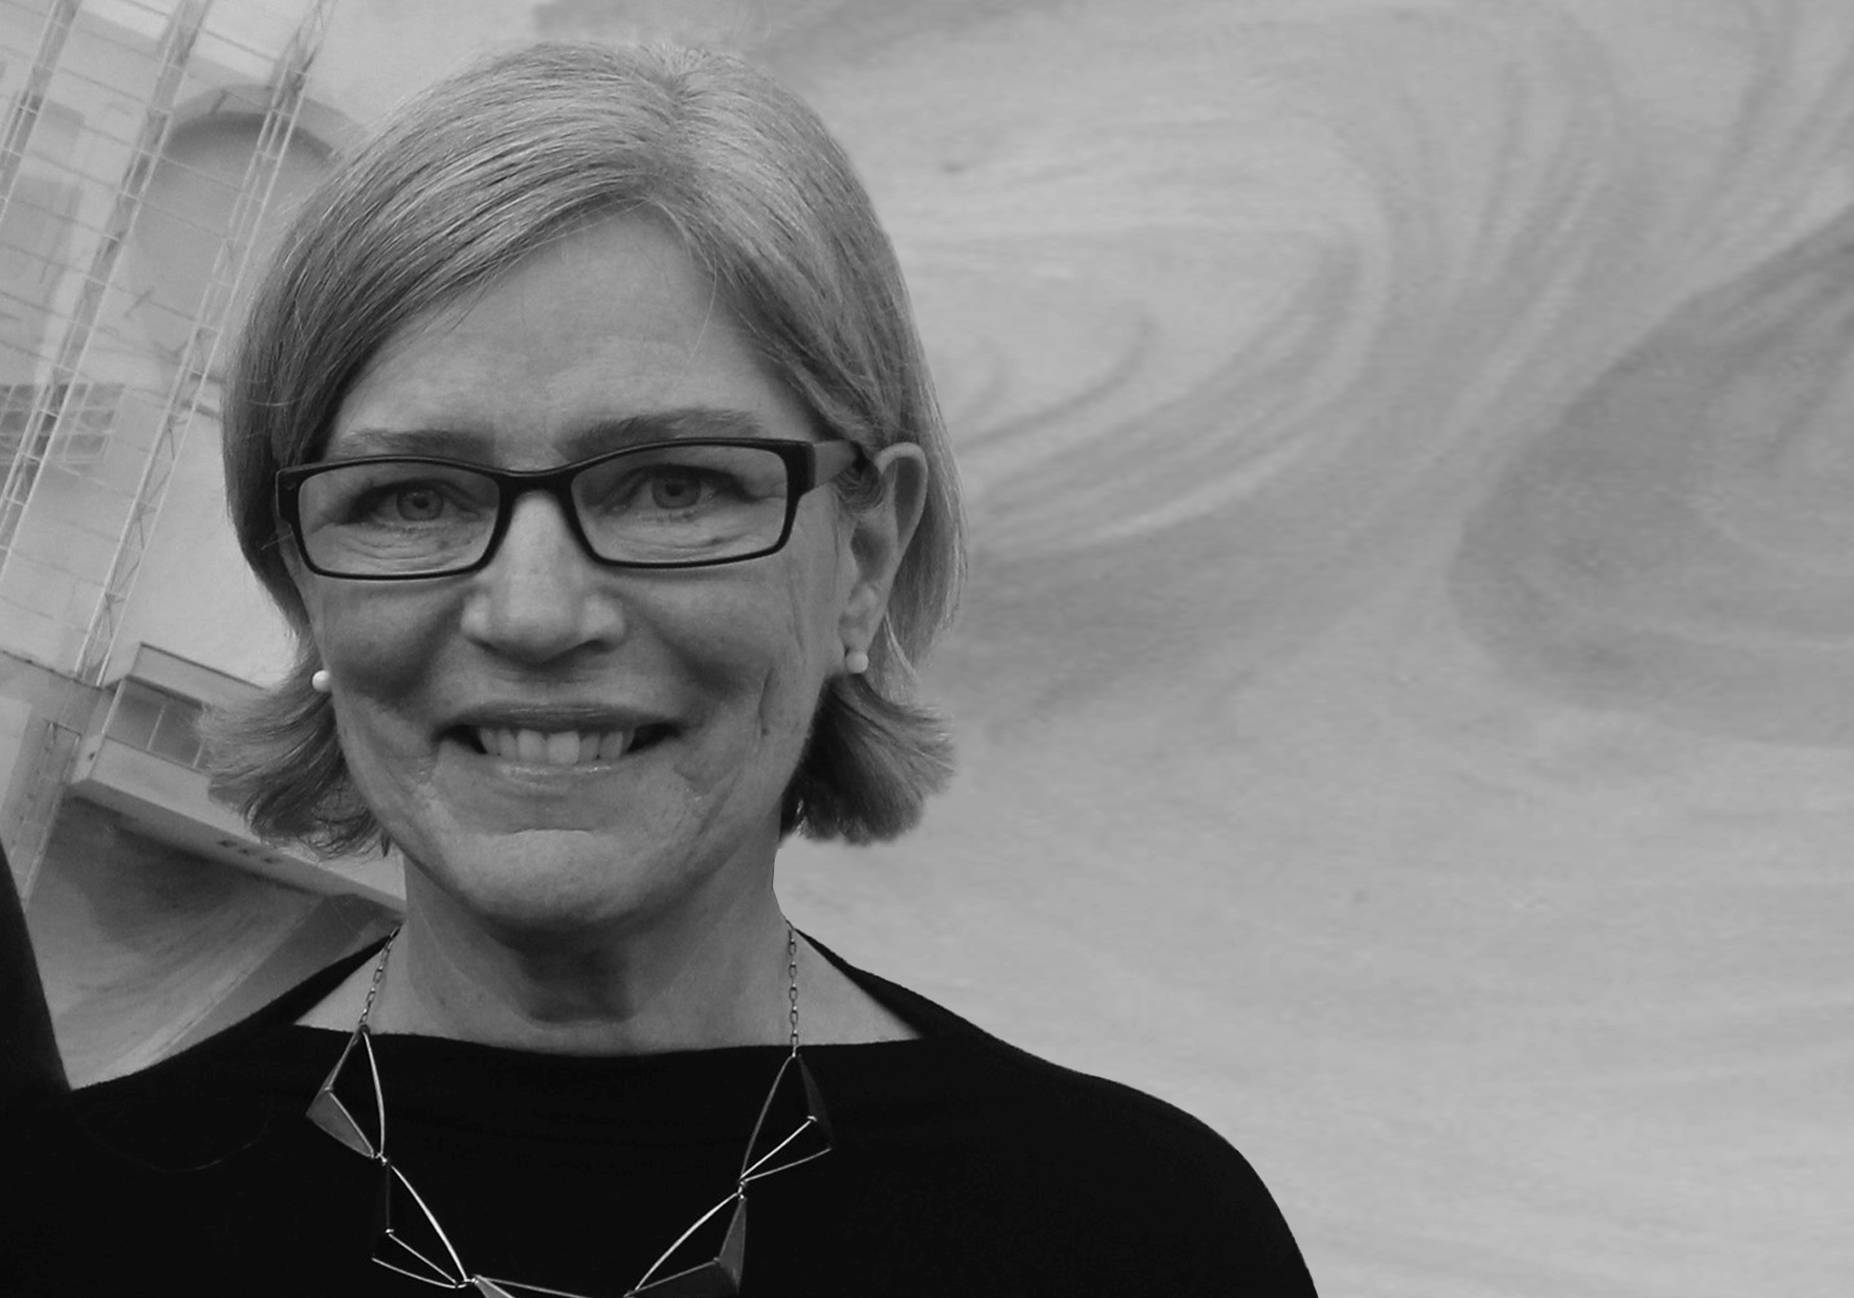 Marsha Ann Maytum, founding principal of Leddy Maytum Stacy Architects and design justice advocate, dies at 69